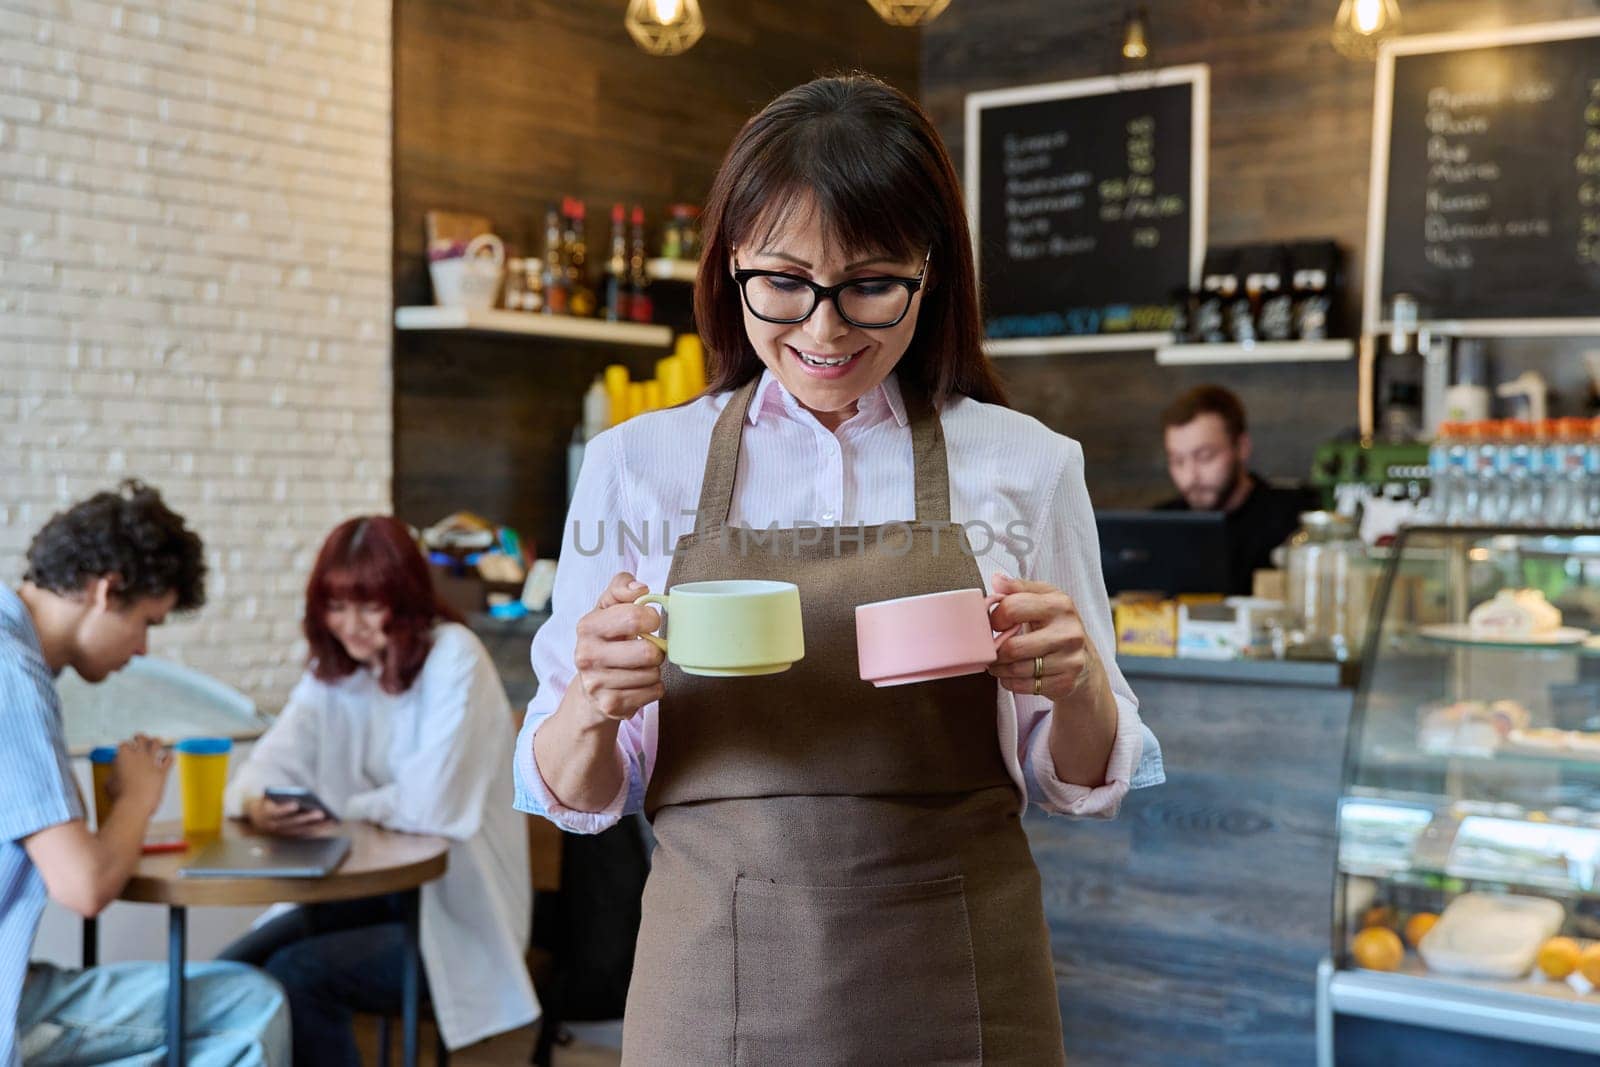 Portrait of smiling female coffee shop worker holding two cups of coffee in her hands. Woman in apron looking at camera inside cafe hall. Small business, food service occupation, staff, work concept